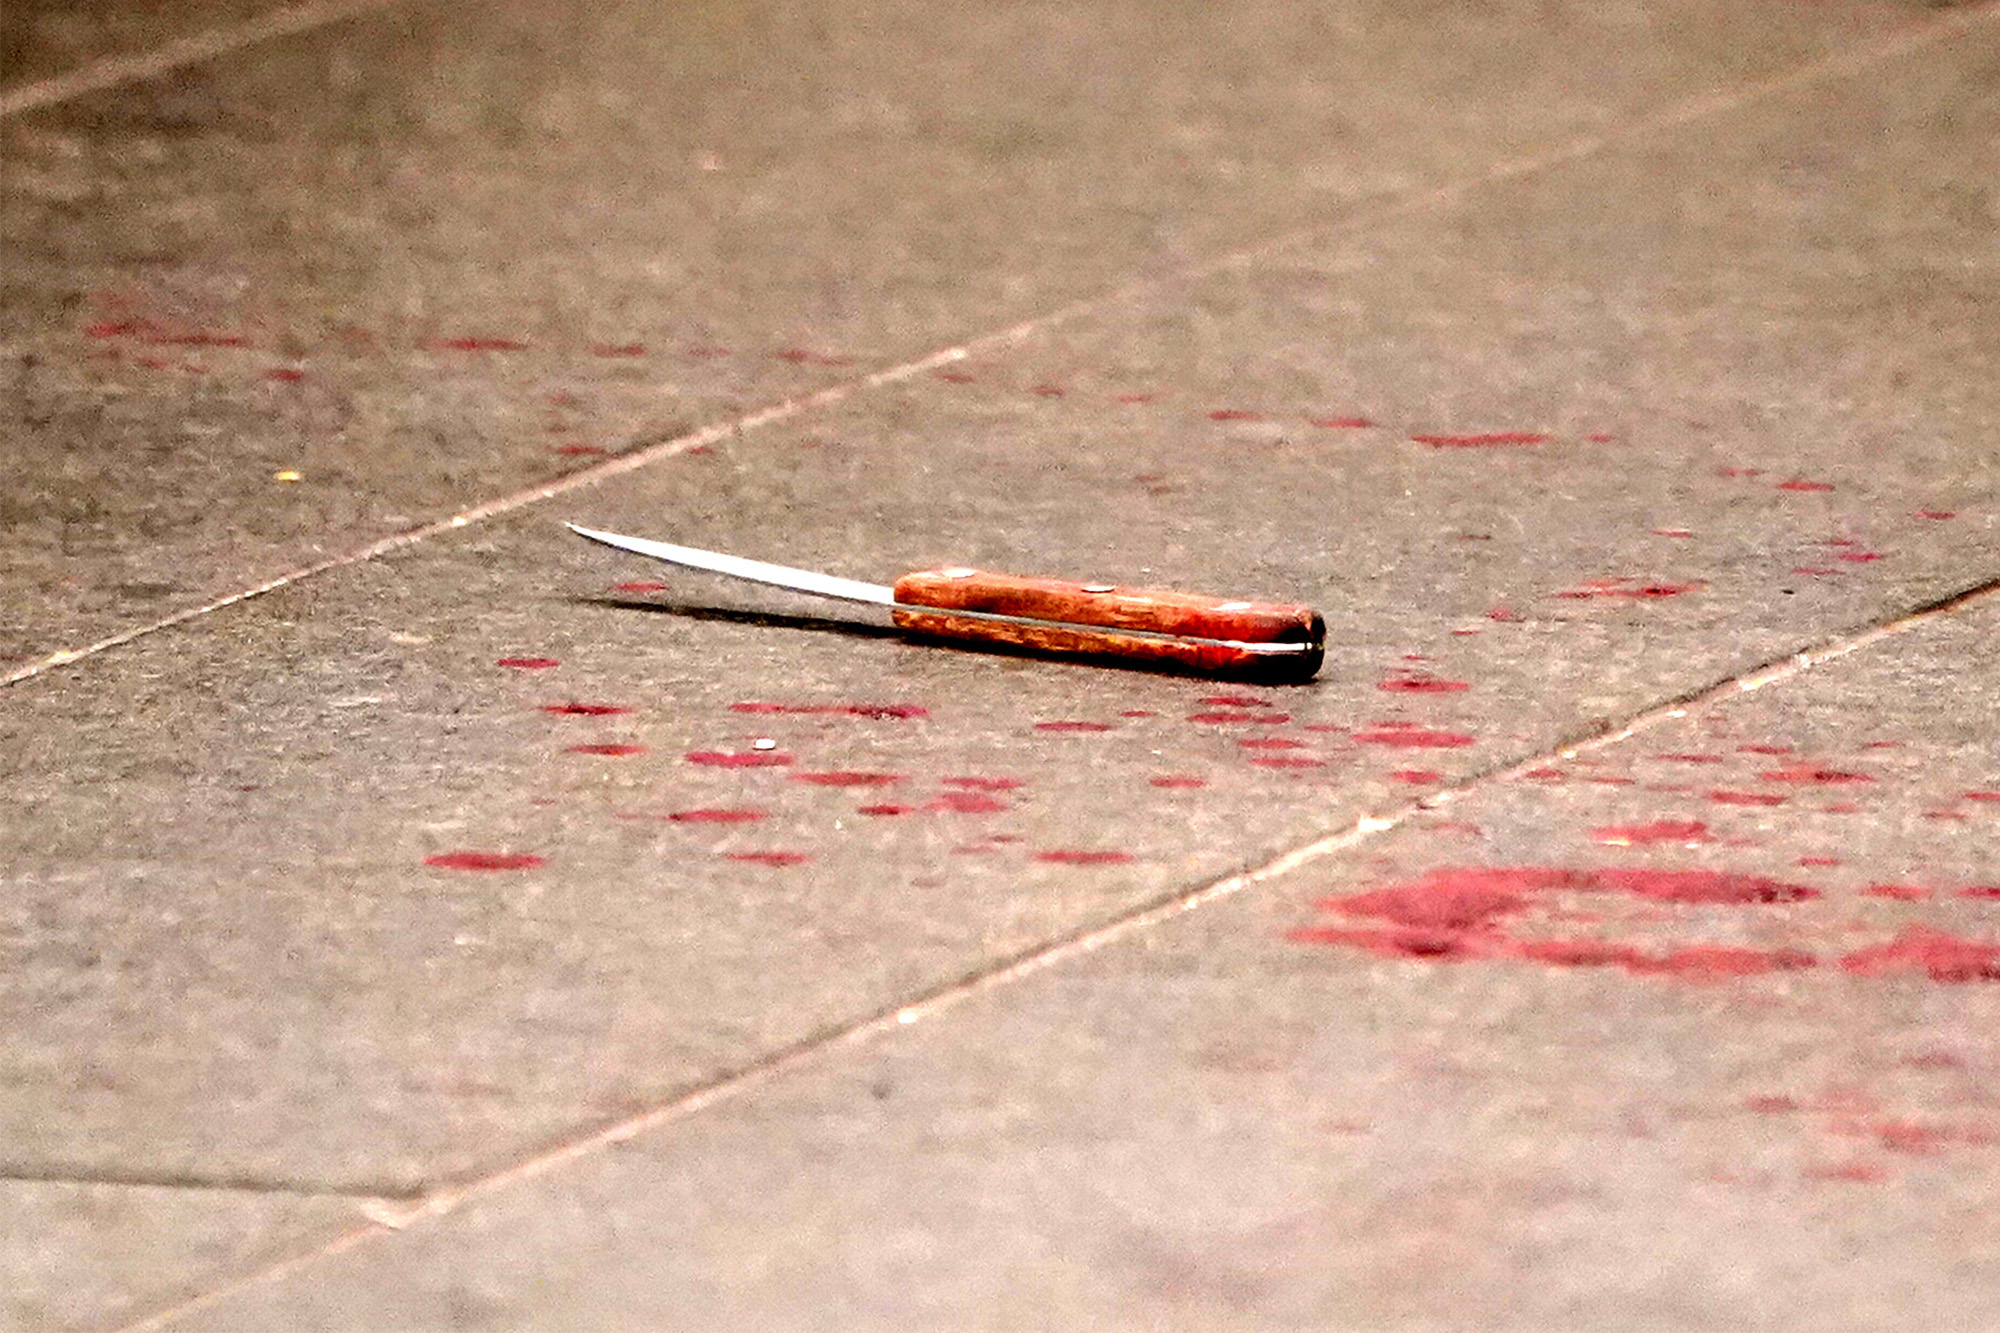 A knife at the scene of the stabbing.